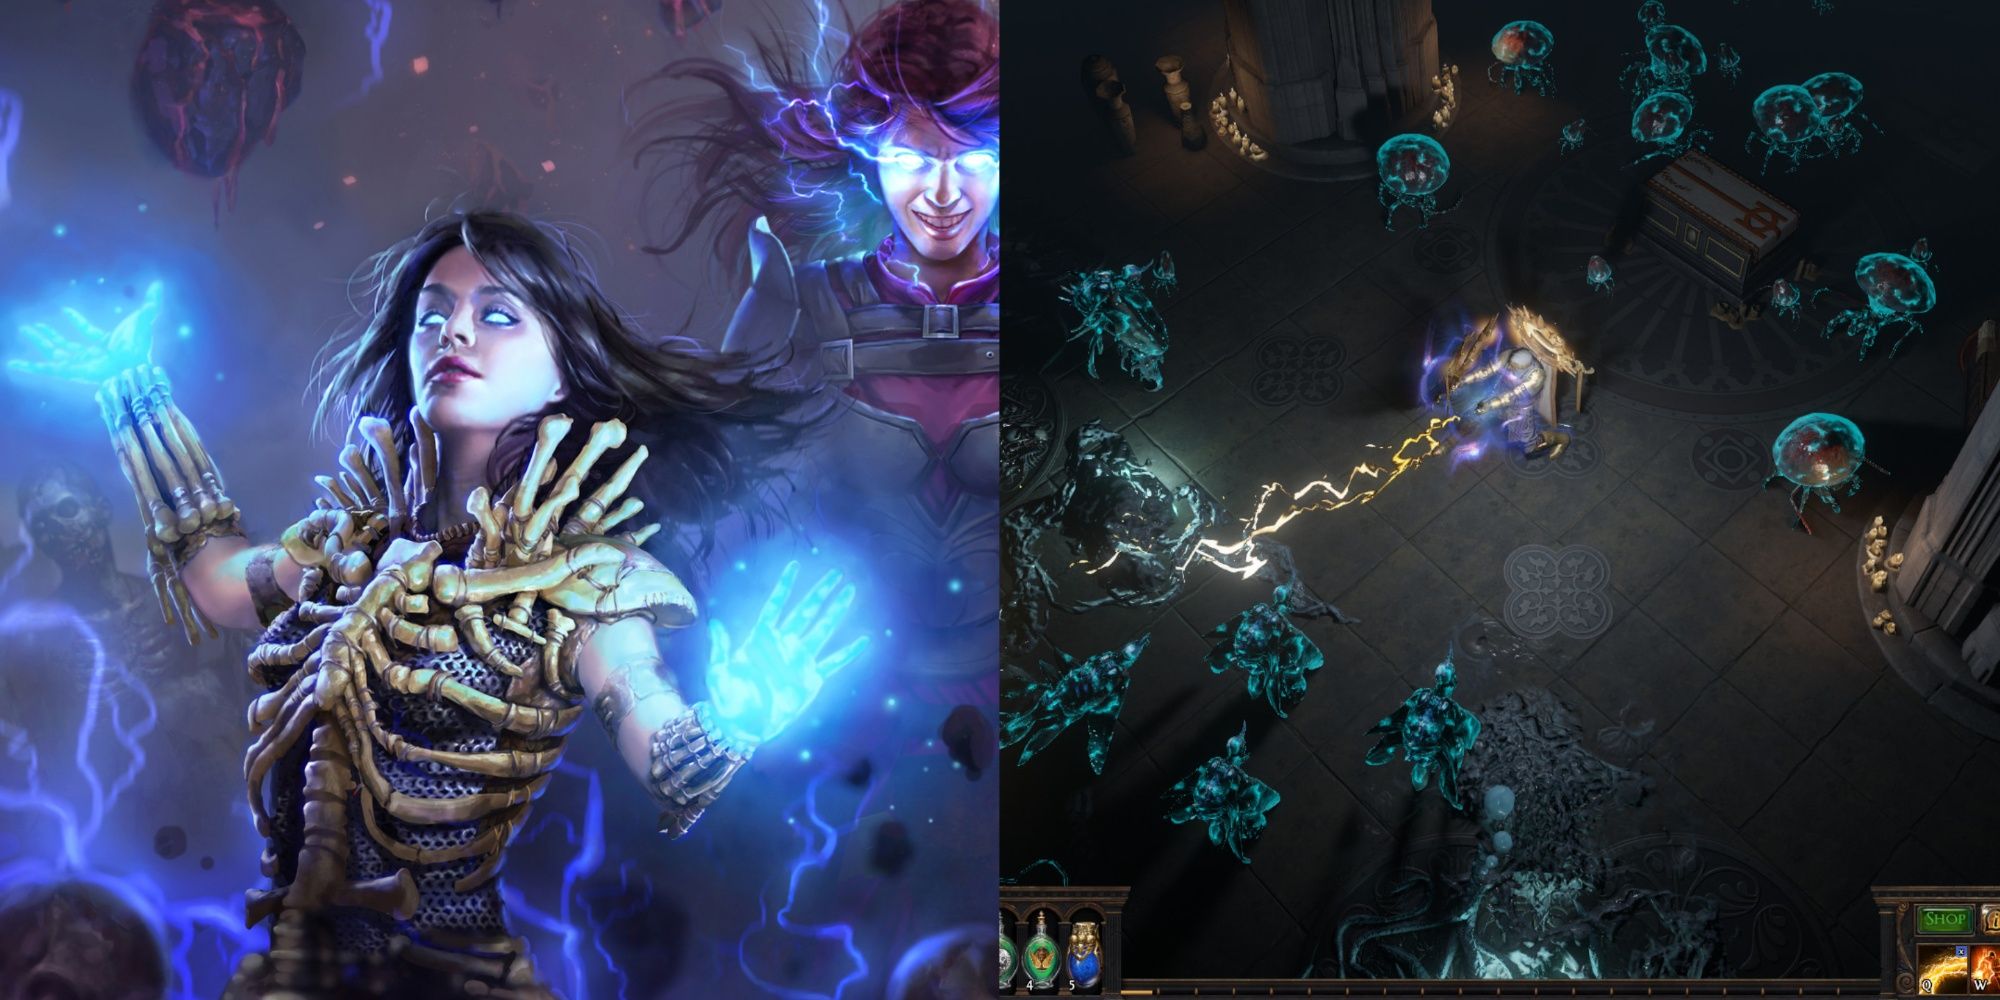 Cinematic photo of a Necromancer and in game screenshot of Witch gameplay